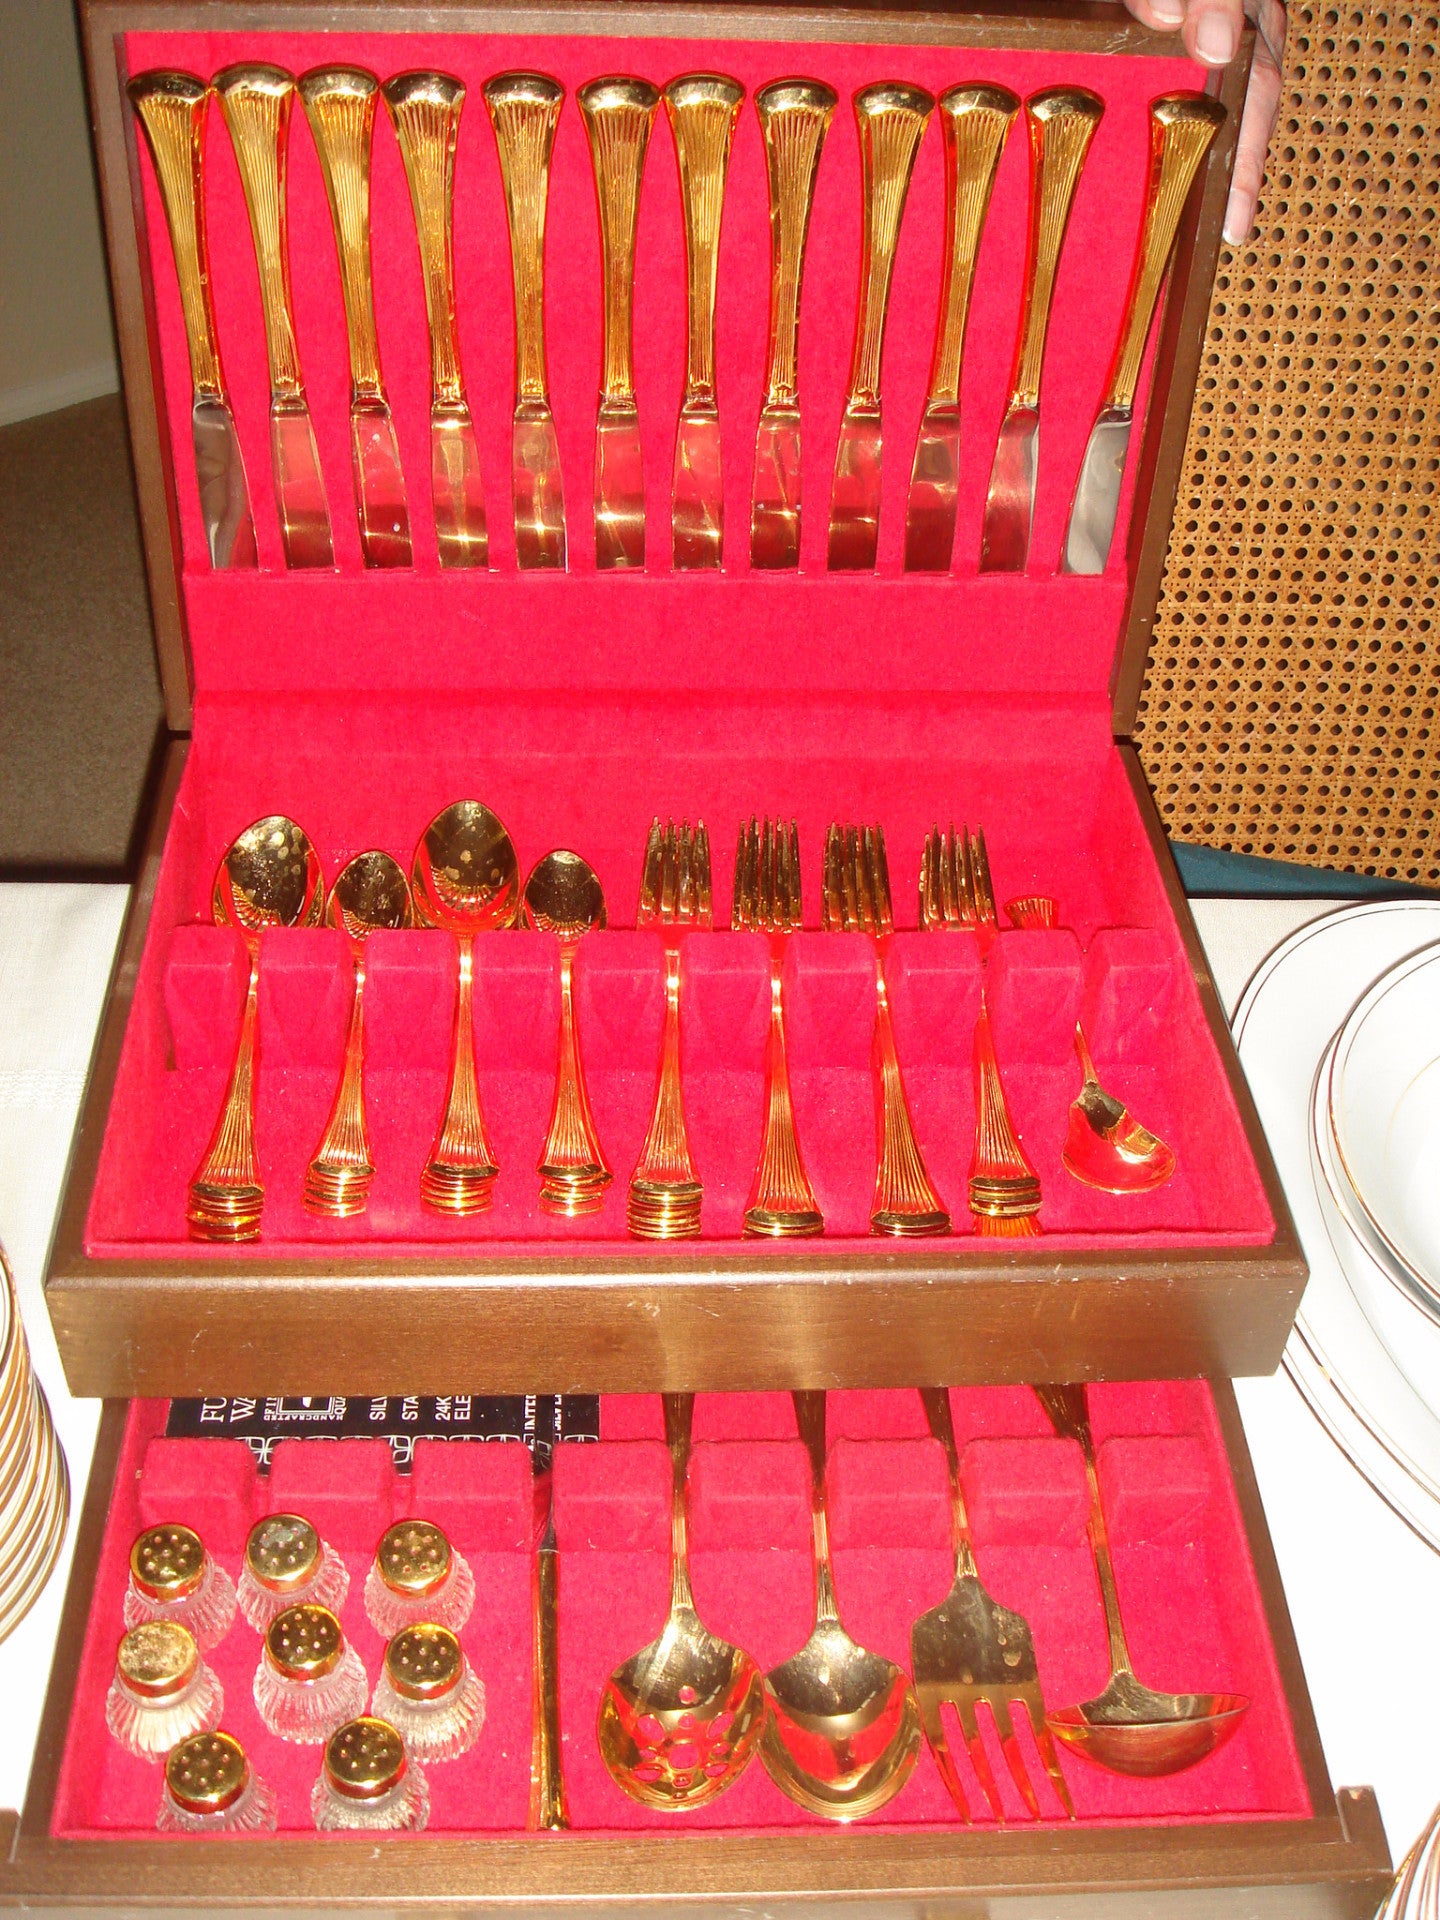 International Silver Company - 24 carat Gold Electroplate cutlery- service for 12